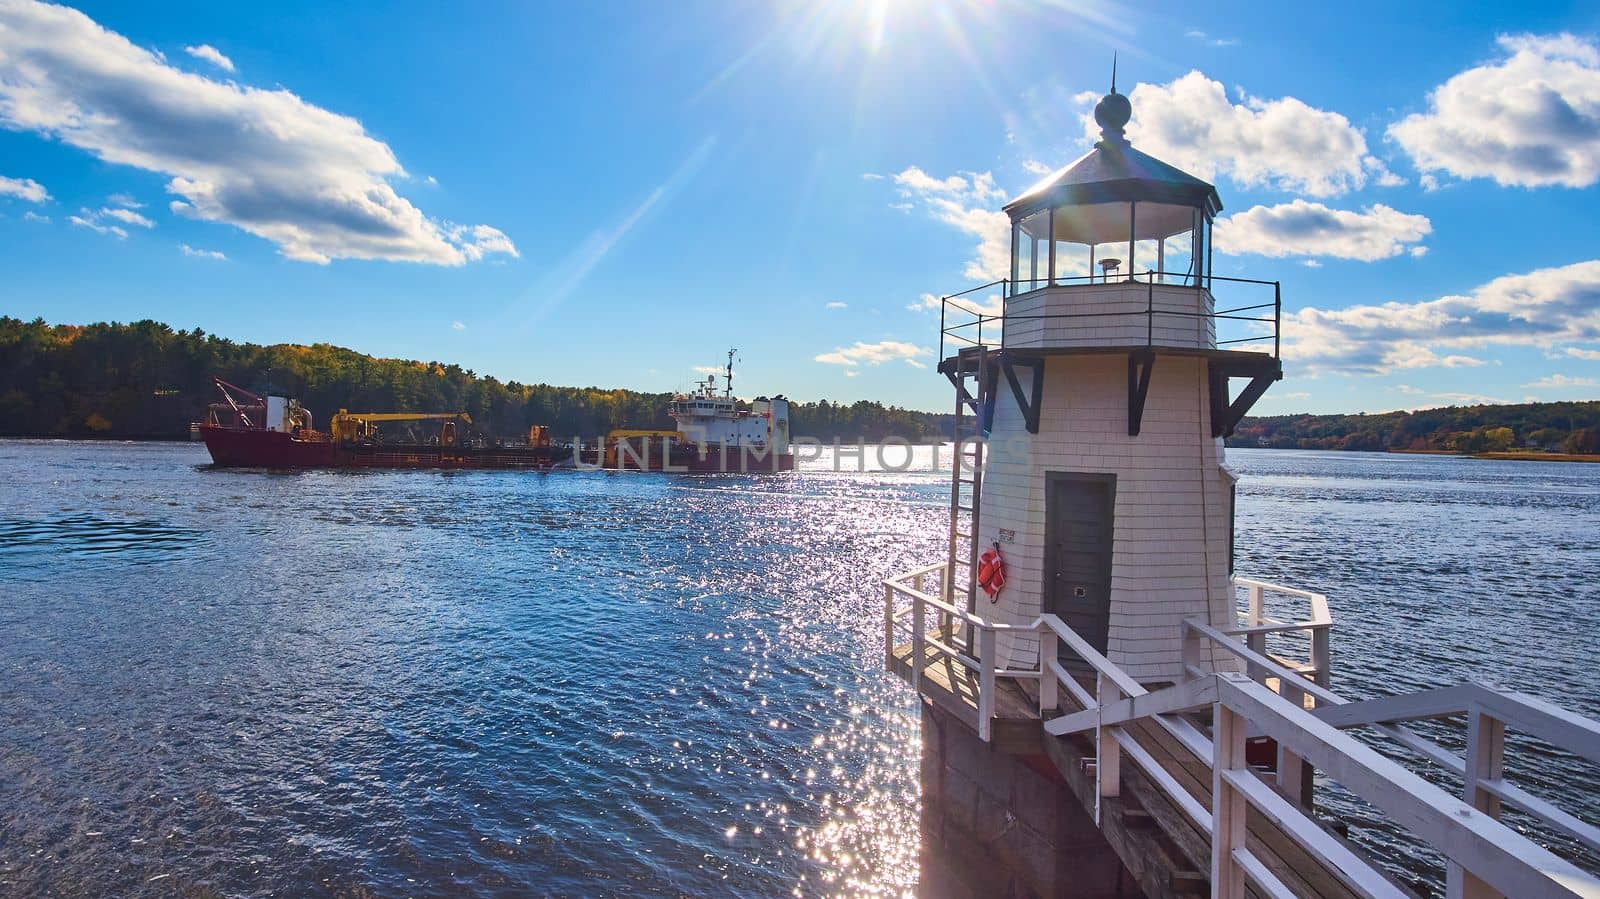 Large commercial ship on Maine river sails past small lighthouse with blue skies by njproductions